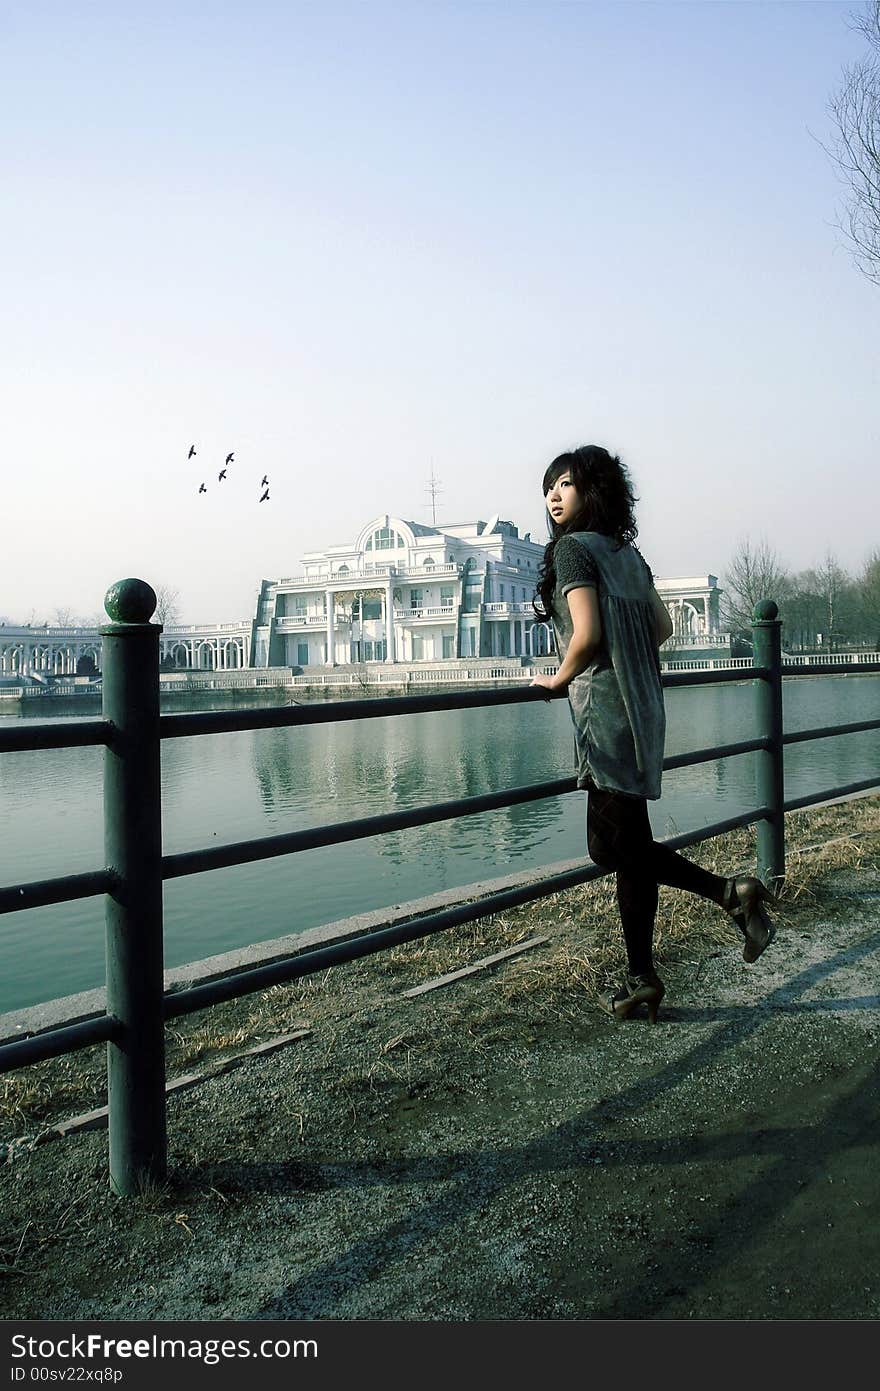 In a park of Beijing, A beautiful Chinese girl is enjoying the scenery in pleasant early spring here. In a park of Beijing, A beautiful Chinese girl is enjoying the scenery in pleasant early spring here.